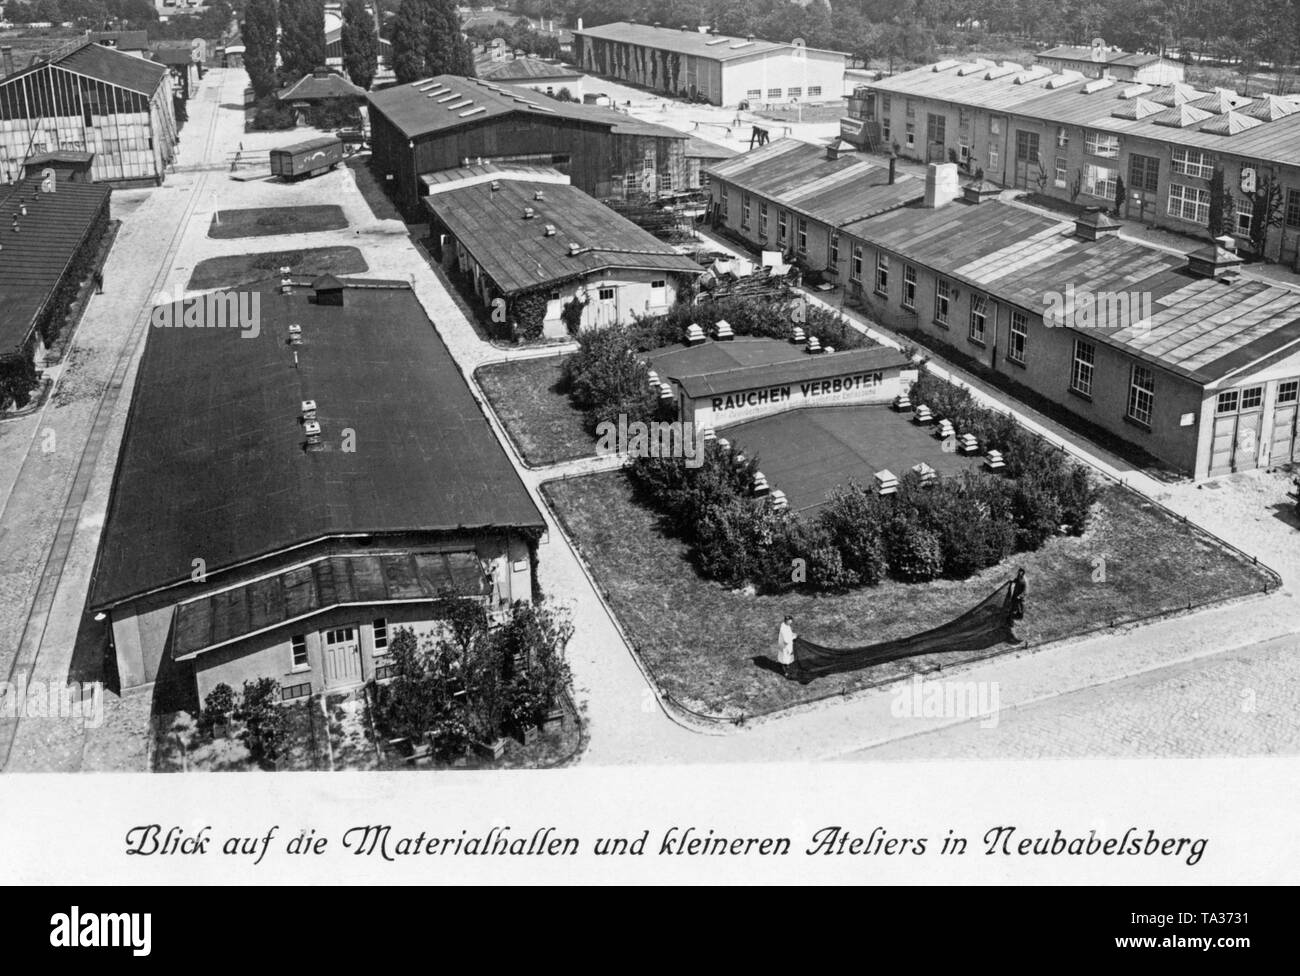 This photograph shows the material halls and smaller studios on the UFA site in Neubabelsberg. Stock Photo